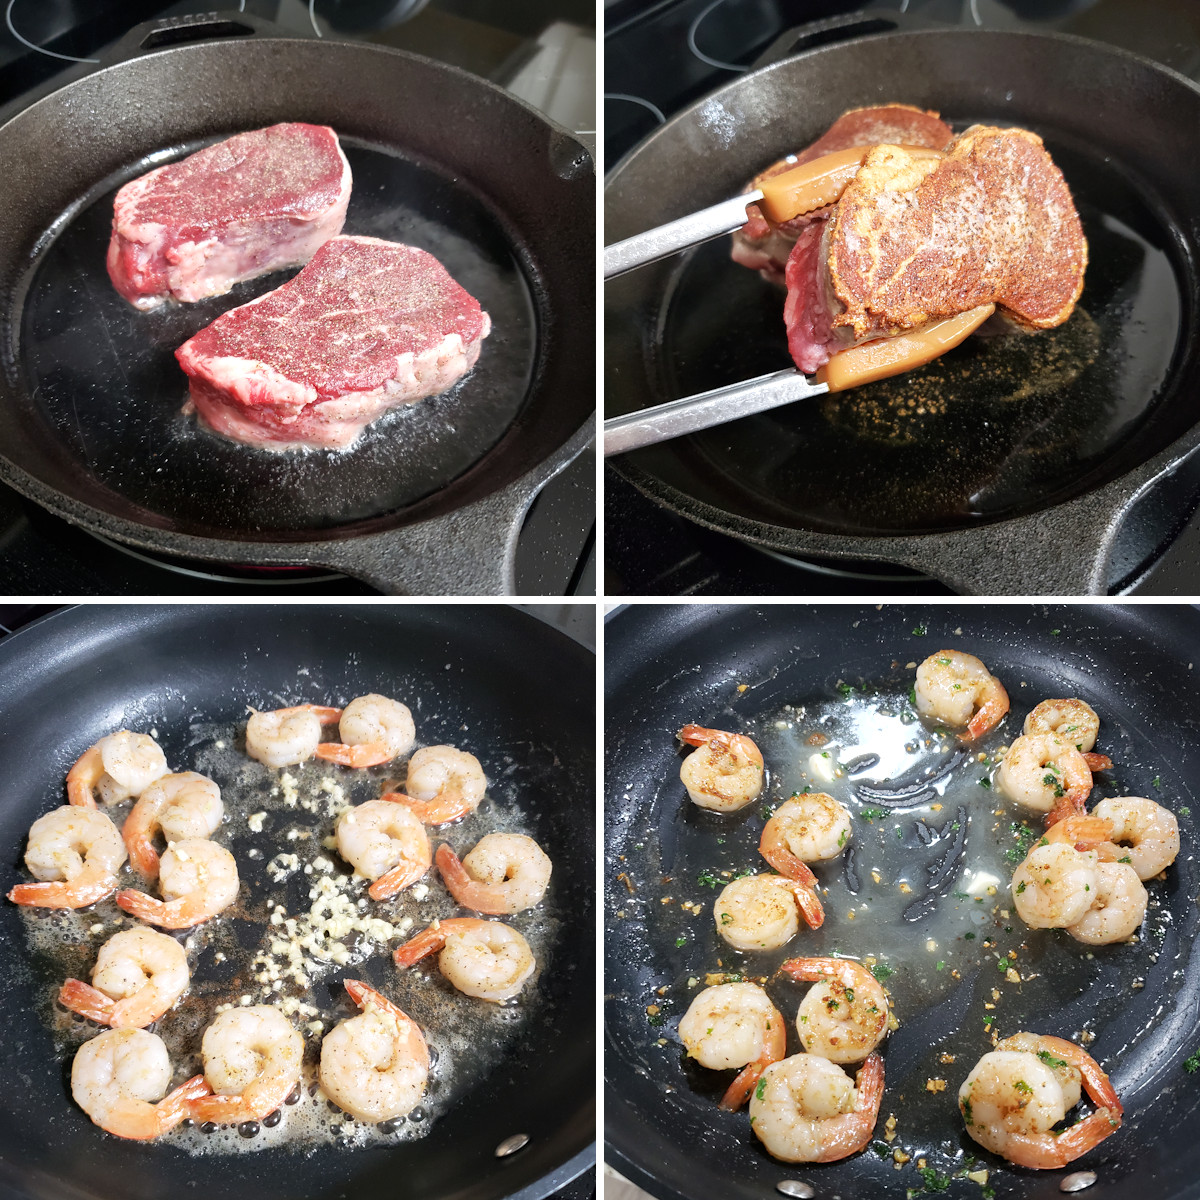 Cooking filet mignon in a pan and then cooking garlic shrimp in a pan.